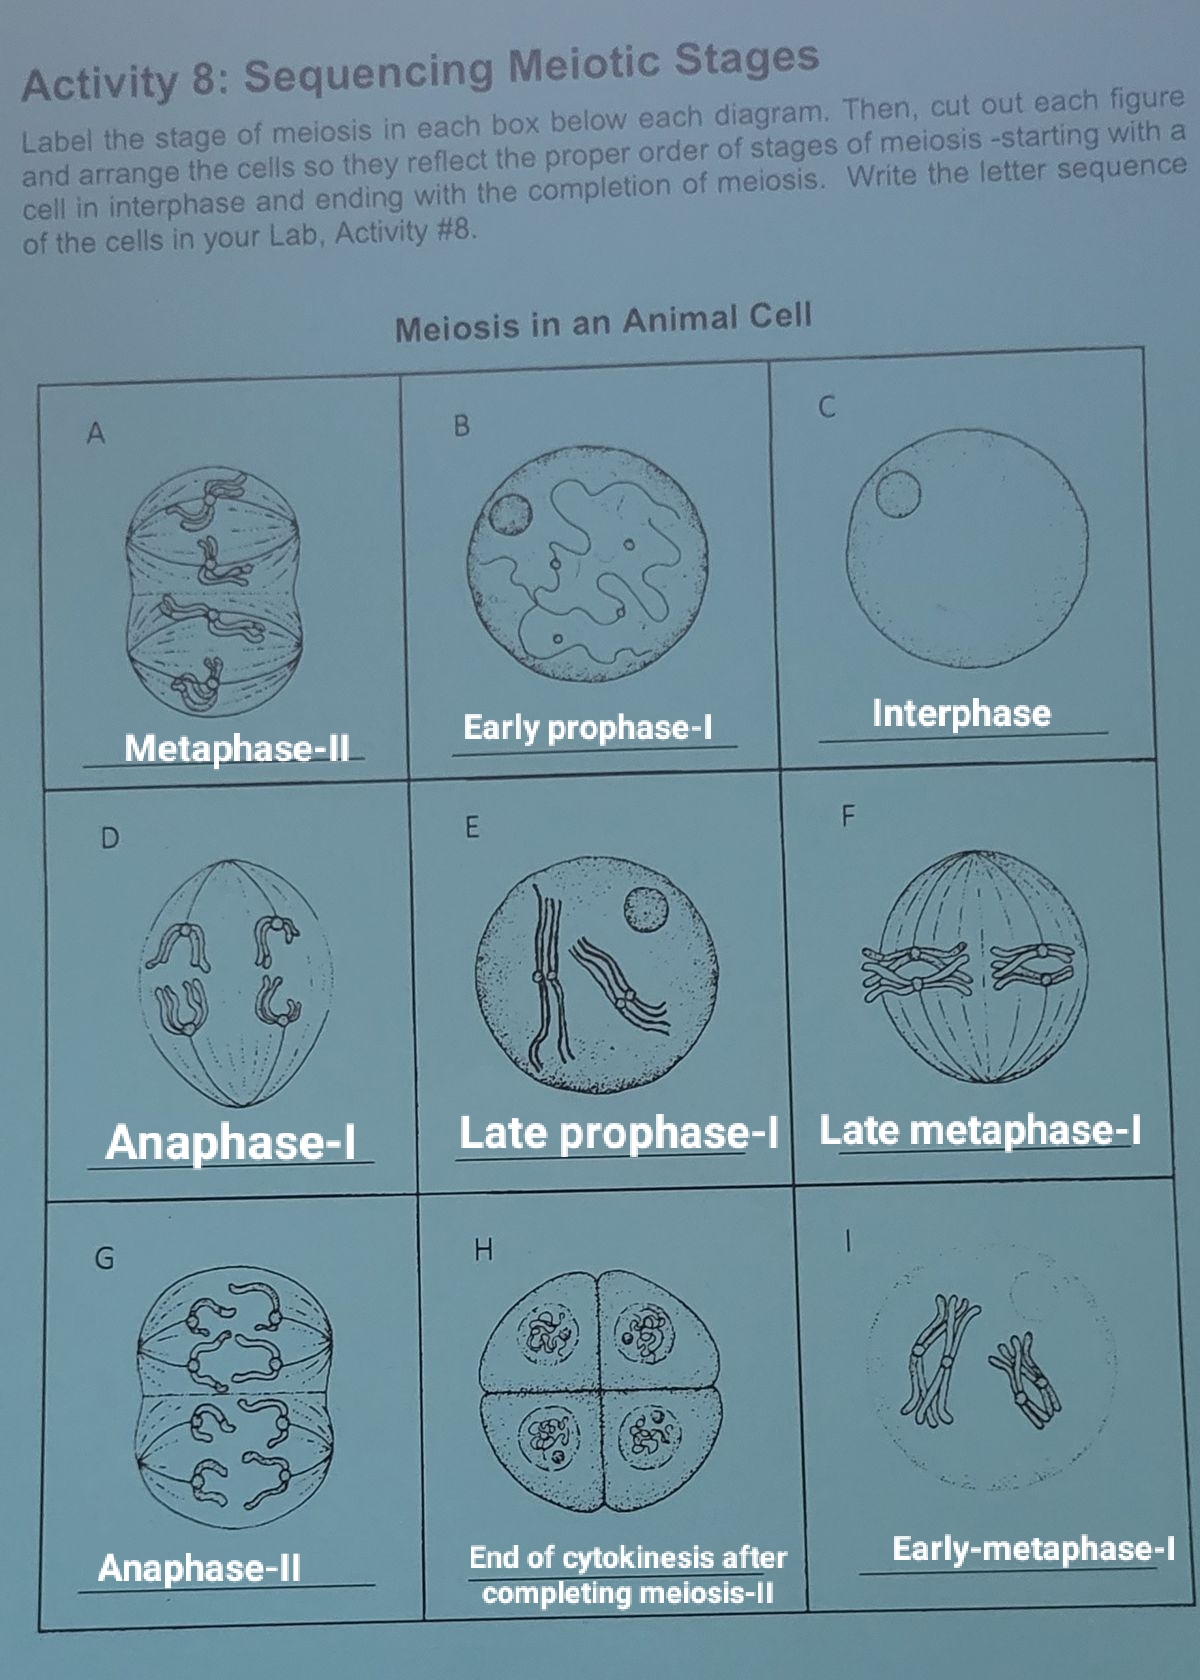 Activity 8: Sequencing Meiotic Stages
Label the stage of meiosis in each box below each diagram. Then, cut out each figure
and arrange the cells so they reflect the proper order of stages of meiosis -starting with a
cell in interphase and ending with the completion of meiosis. Write the letter sequence
of the cells in your Lab, Activity #8.
Metaphase-II
Anaphase-I
G
C
sasas
Anaphase-II
Meiosis in an Animal Cell
B
Early prophase-l
E
C
End of cytokinesis after
completing meiosis-II
F
Interphase
Late prophase-I Late metaphase-l
Early-metaphase-I